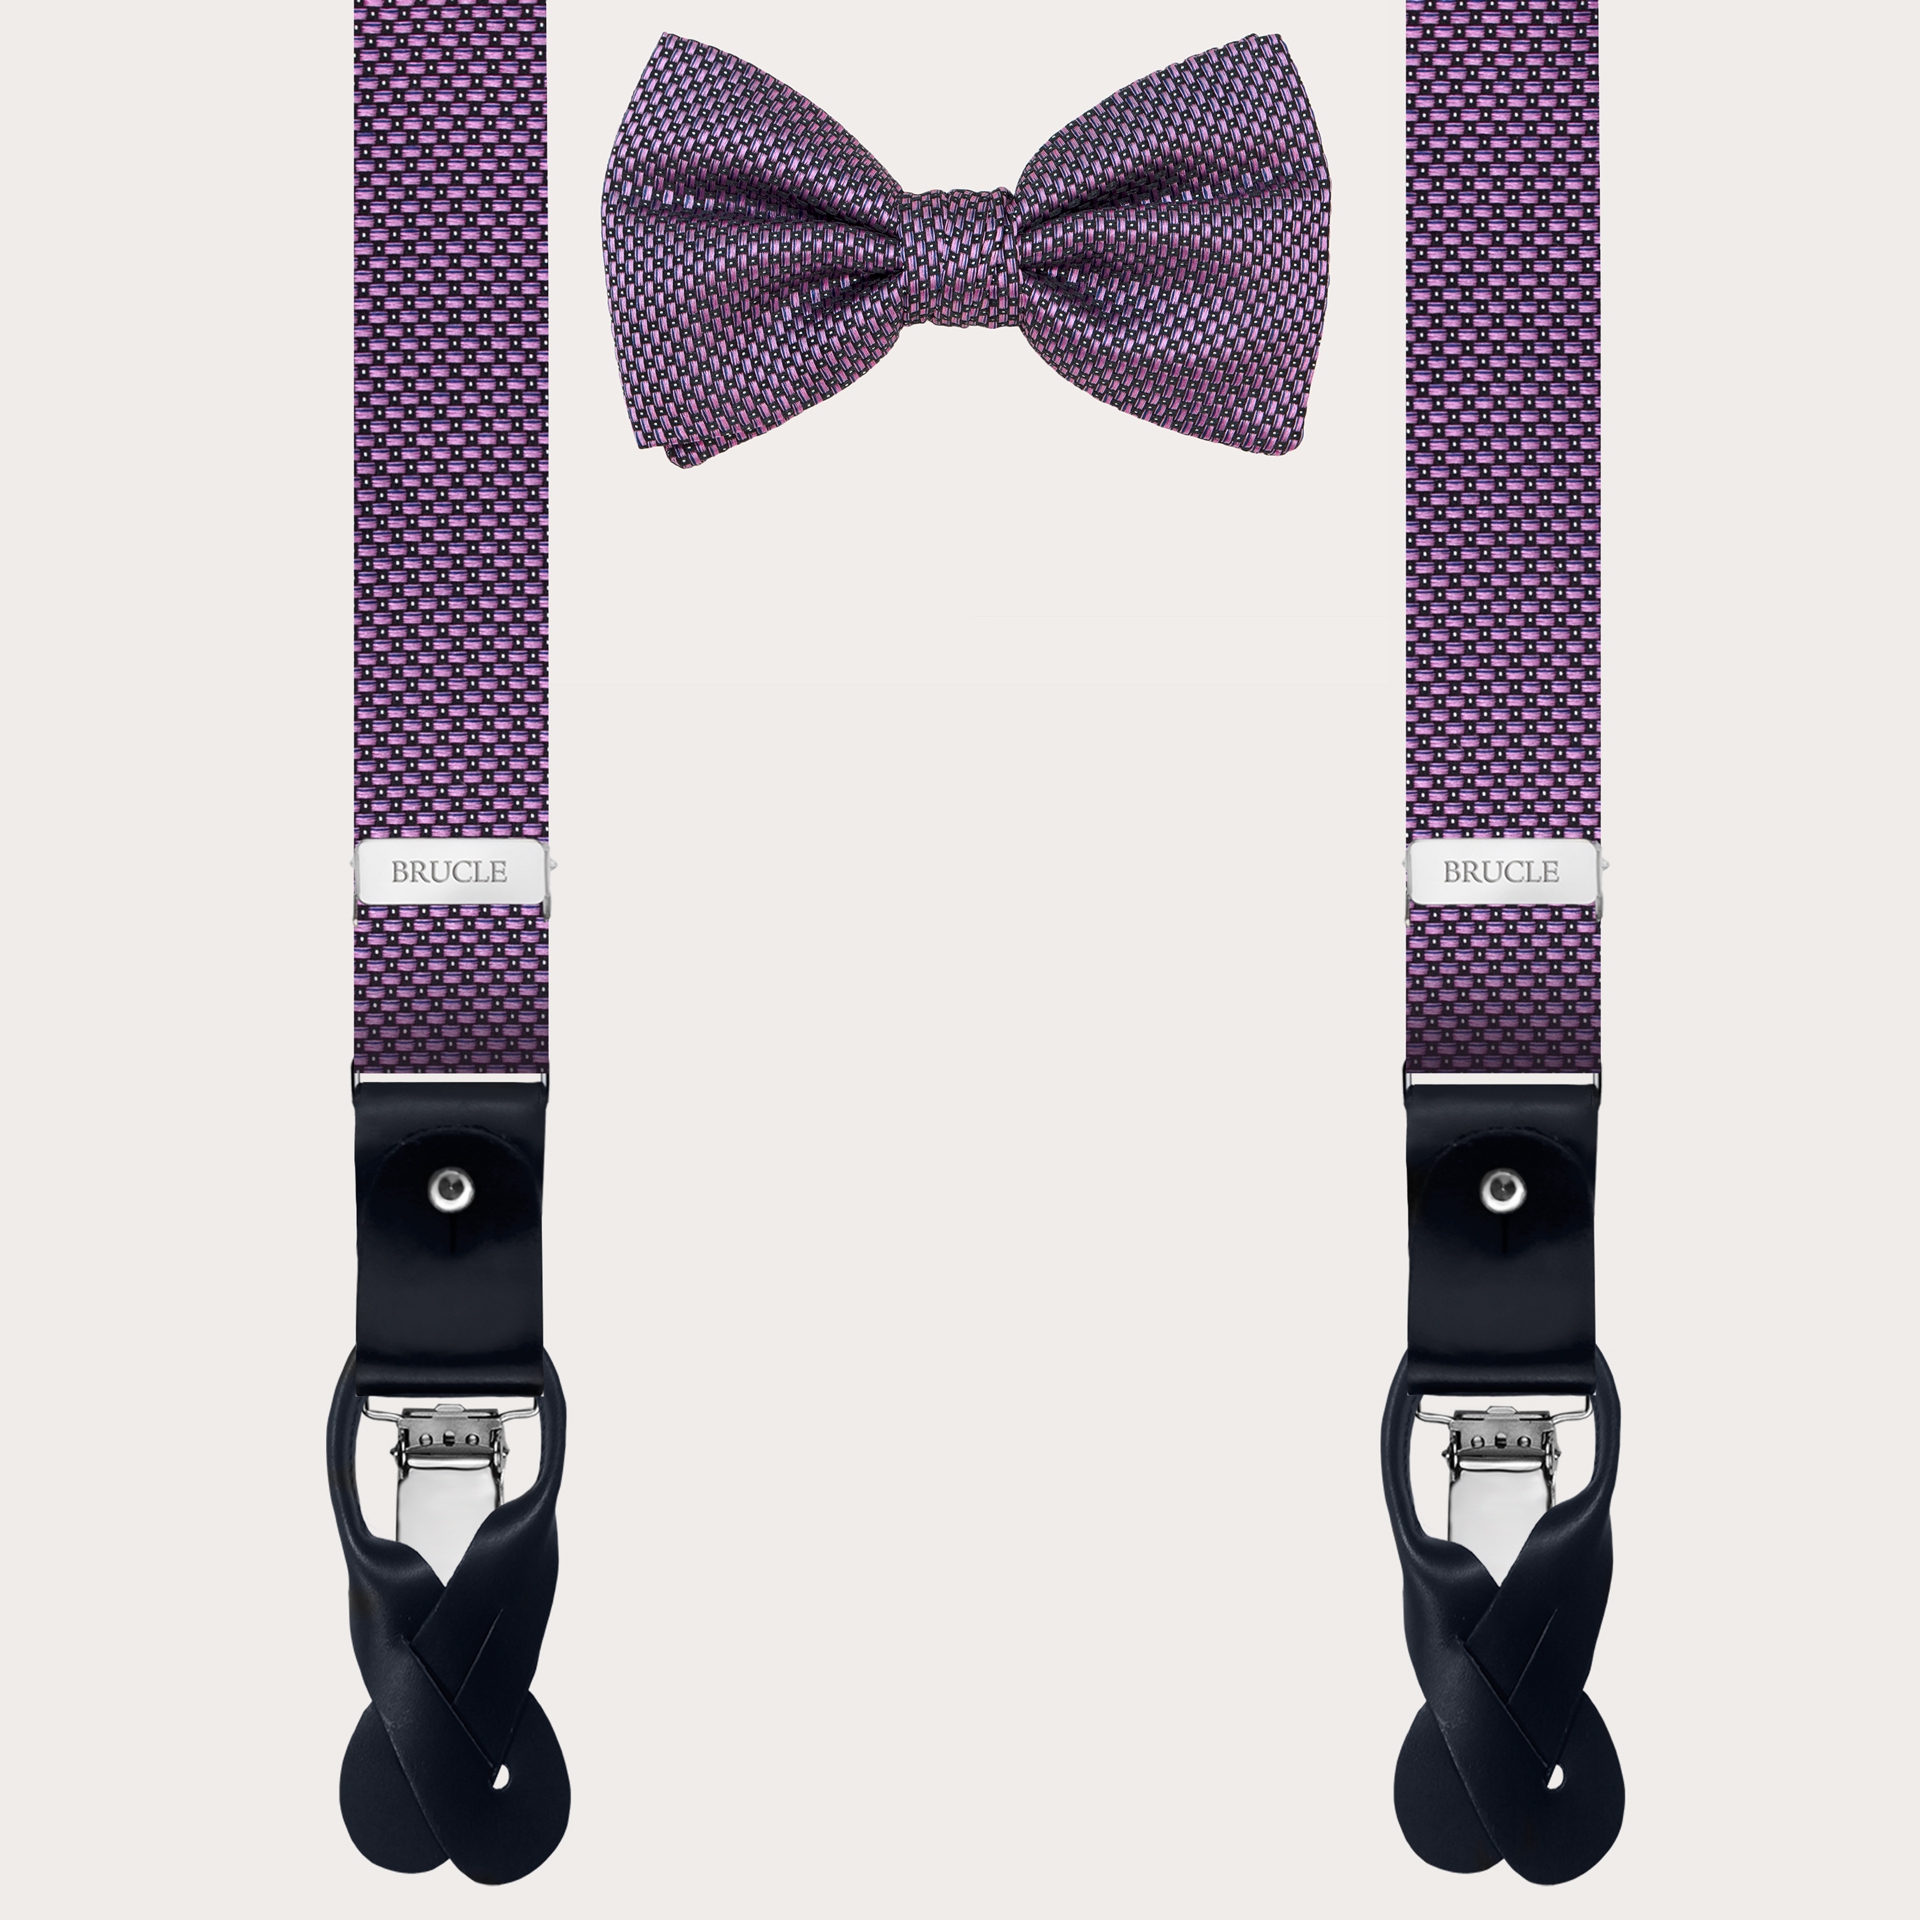 BRUCLE Thin suspenders and bow tie, coordinated in pink dotted silk